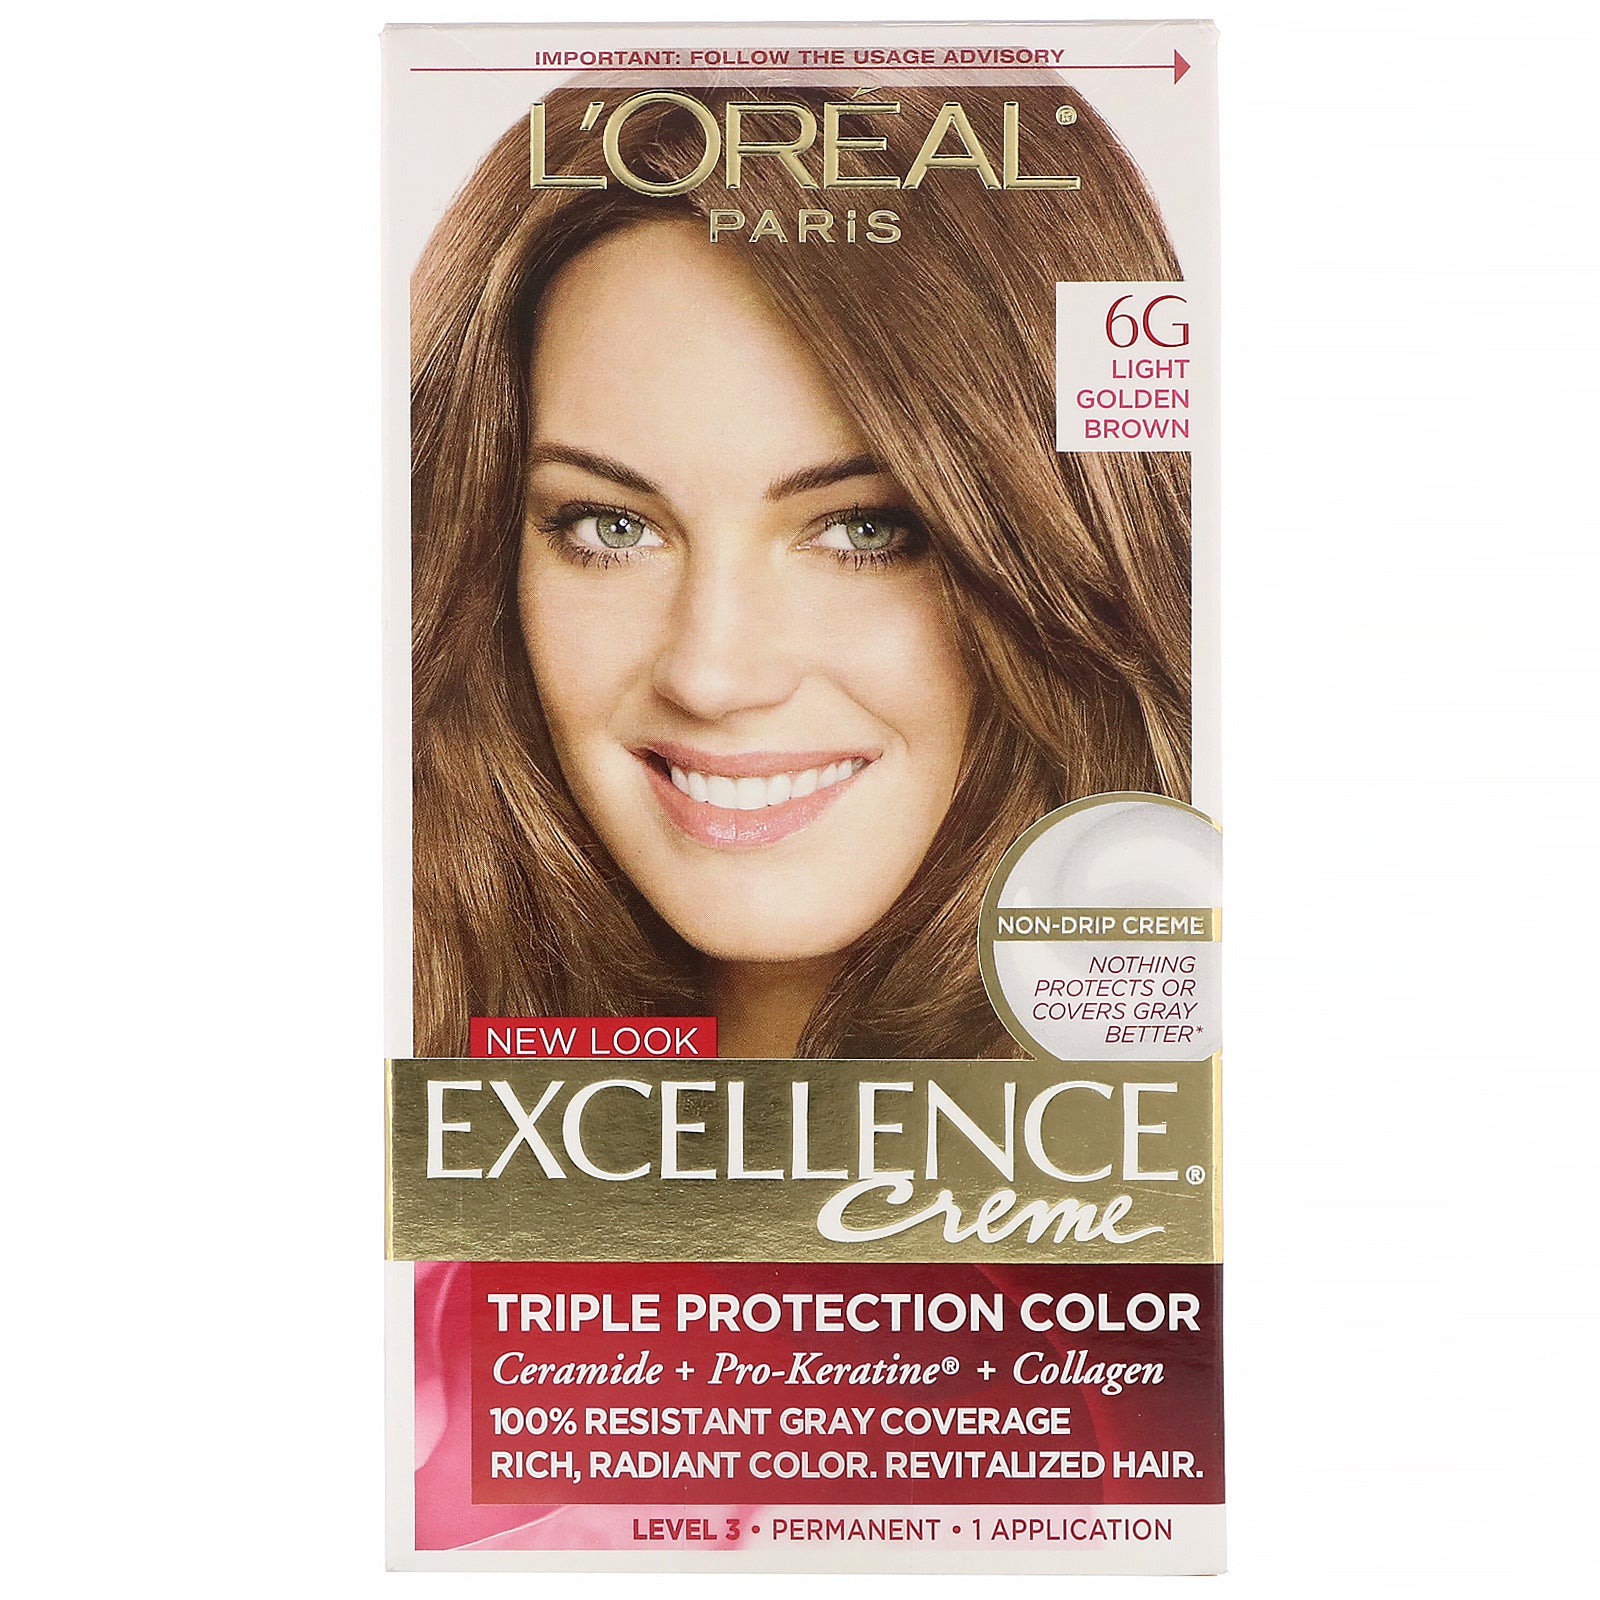 L'Oreal, Excellence Creme, Triple Protection Color, 6G Light Golden Brown, 1 Application